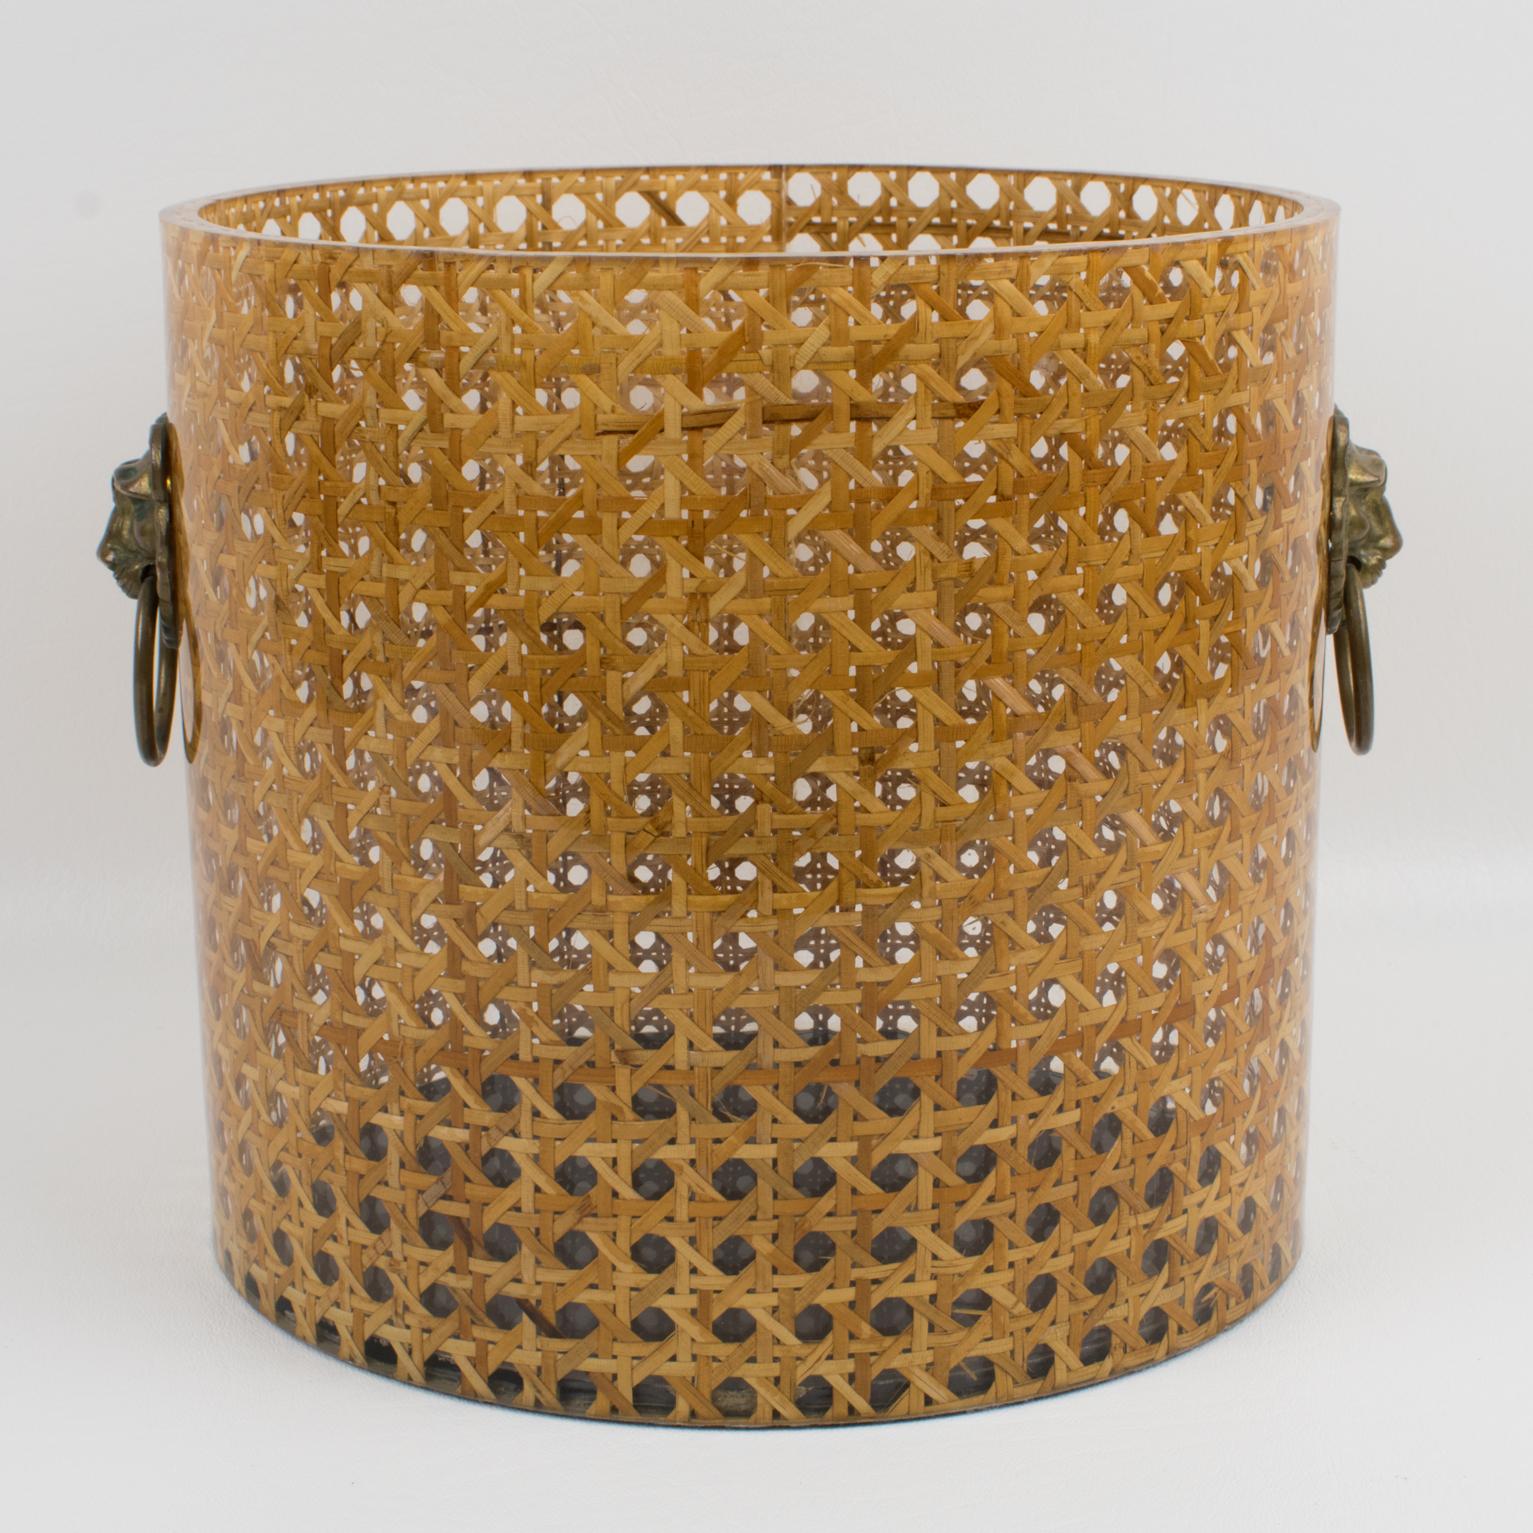 Christian Dior Home Collection 1970s Lucite and Rattan Waste Basket or Planter 2